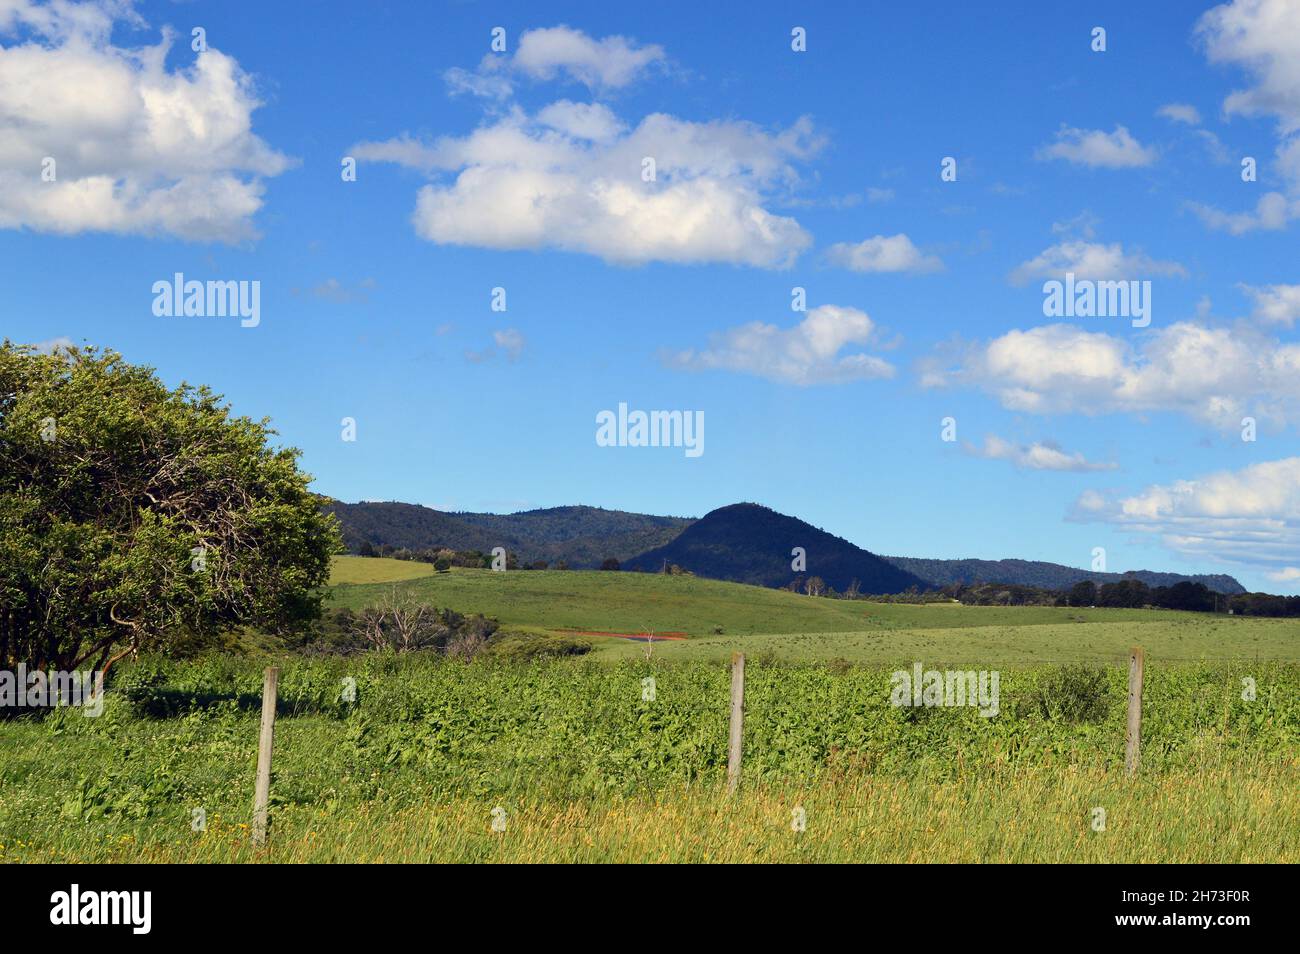 A view of countryside along the Waterfall Way between Dorrigo and Armidale in NSW, Australia Stock Photo